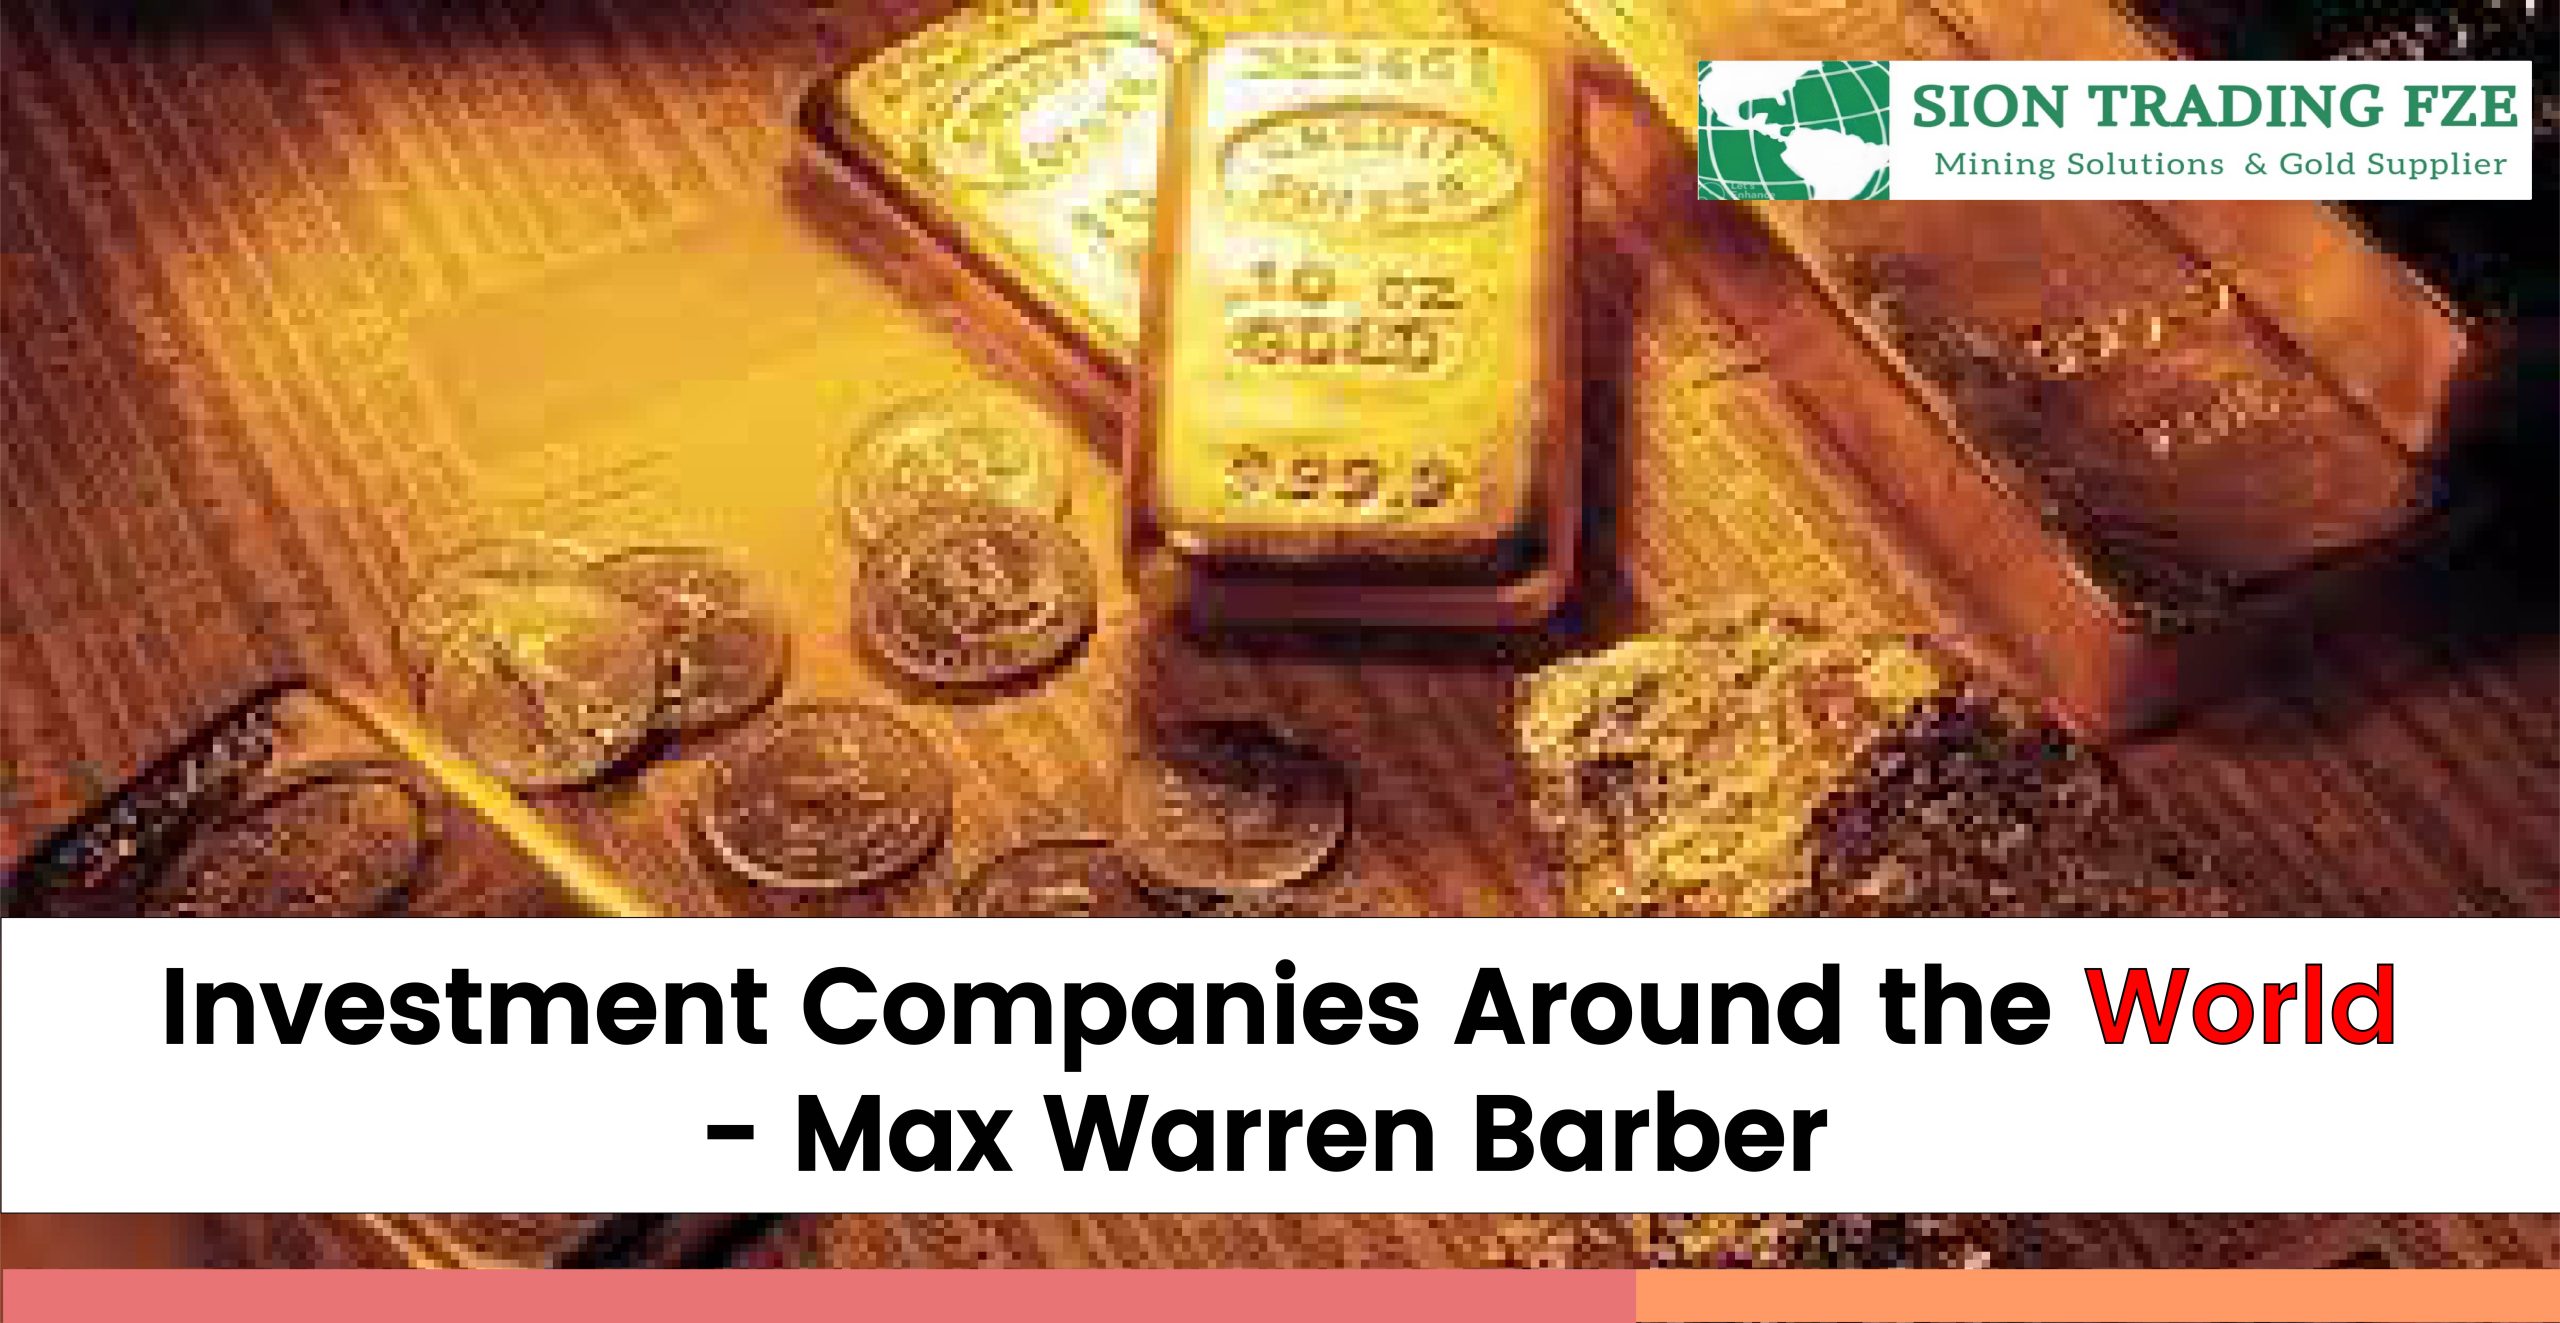 Sion gold trading fze max warren barber gold scam